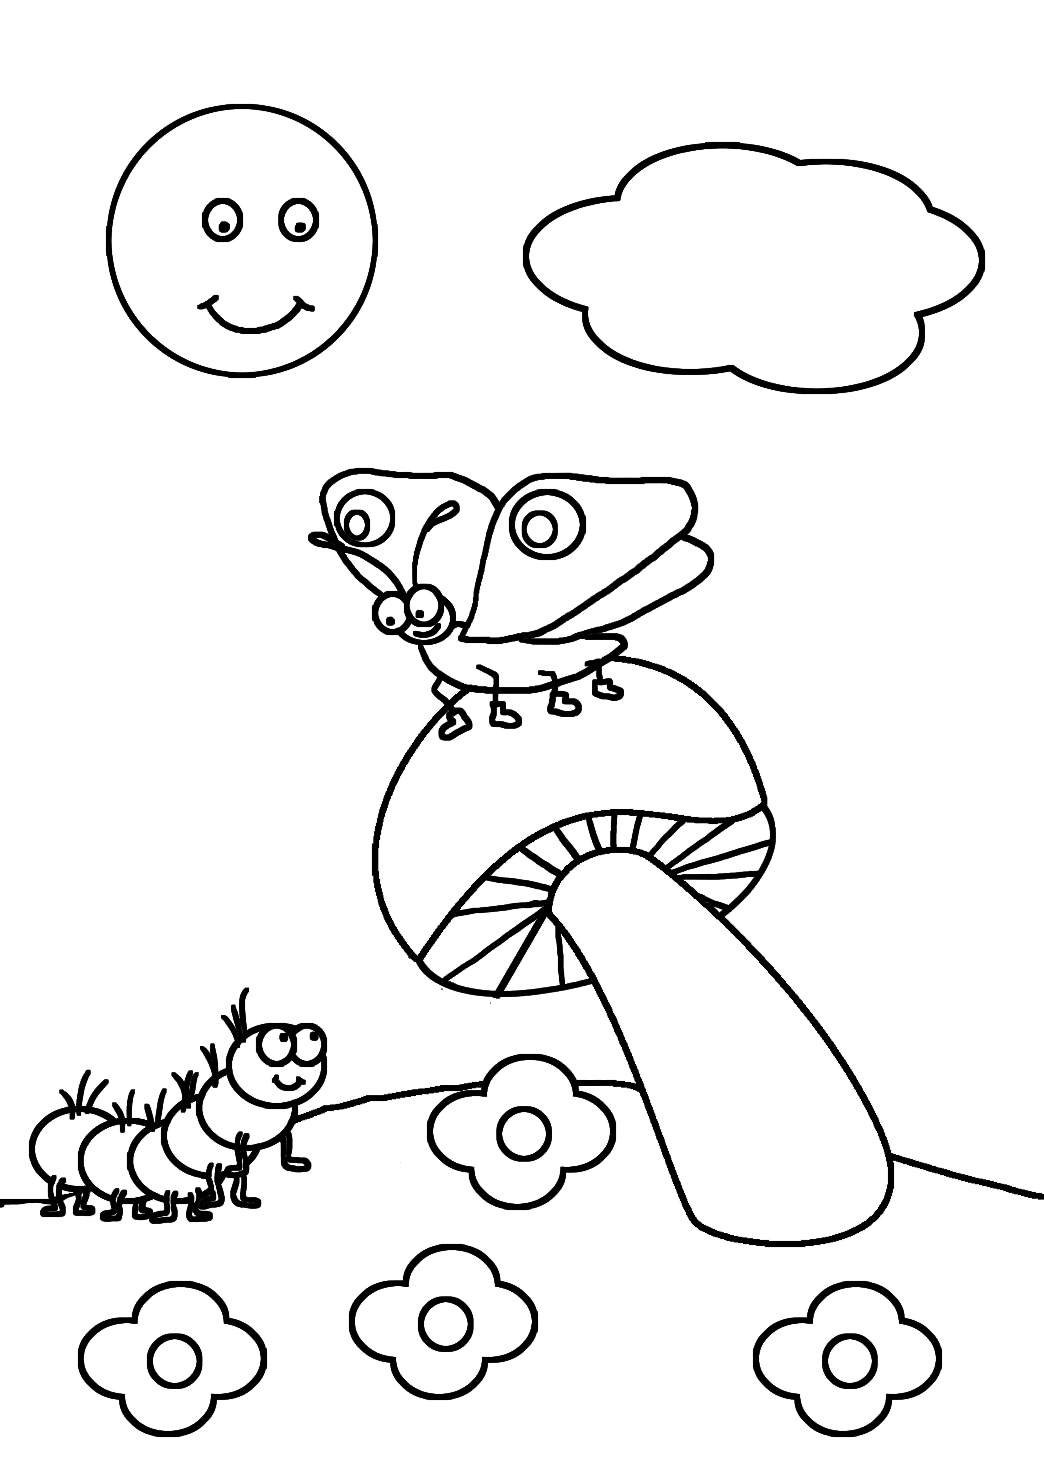 caterpillar and butterfly drawing